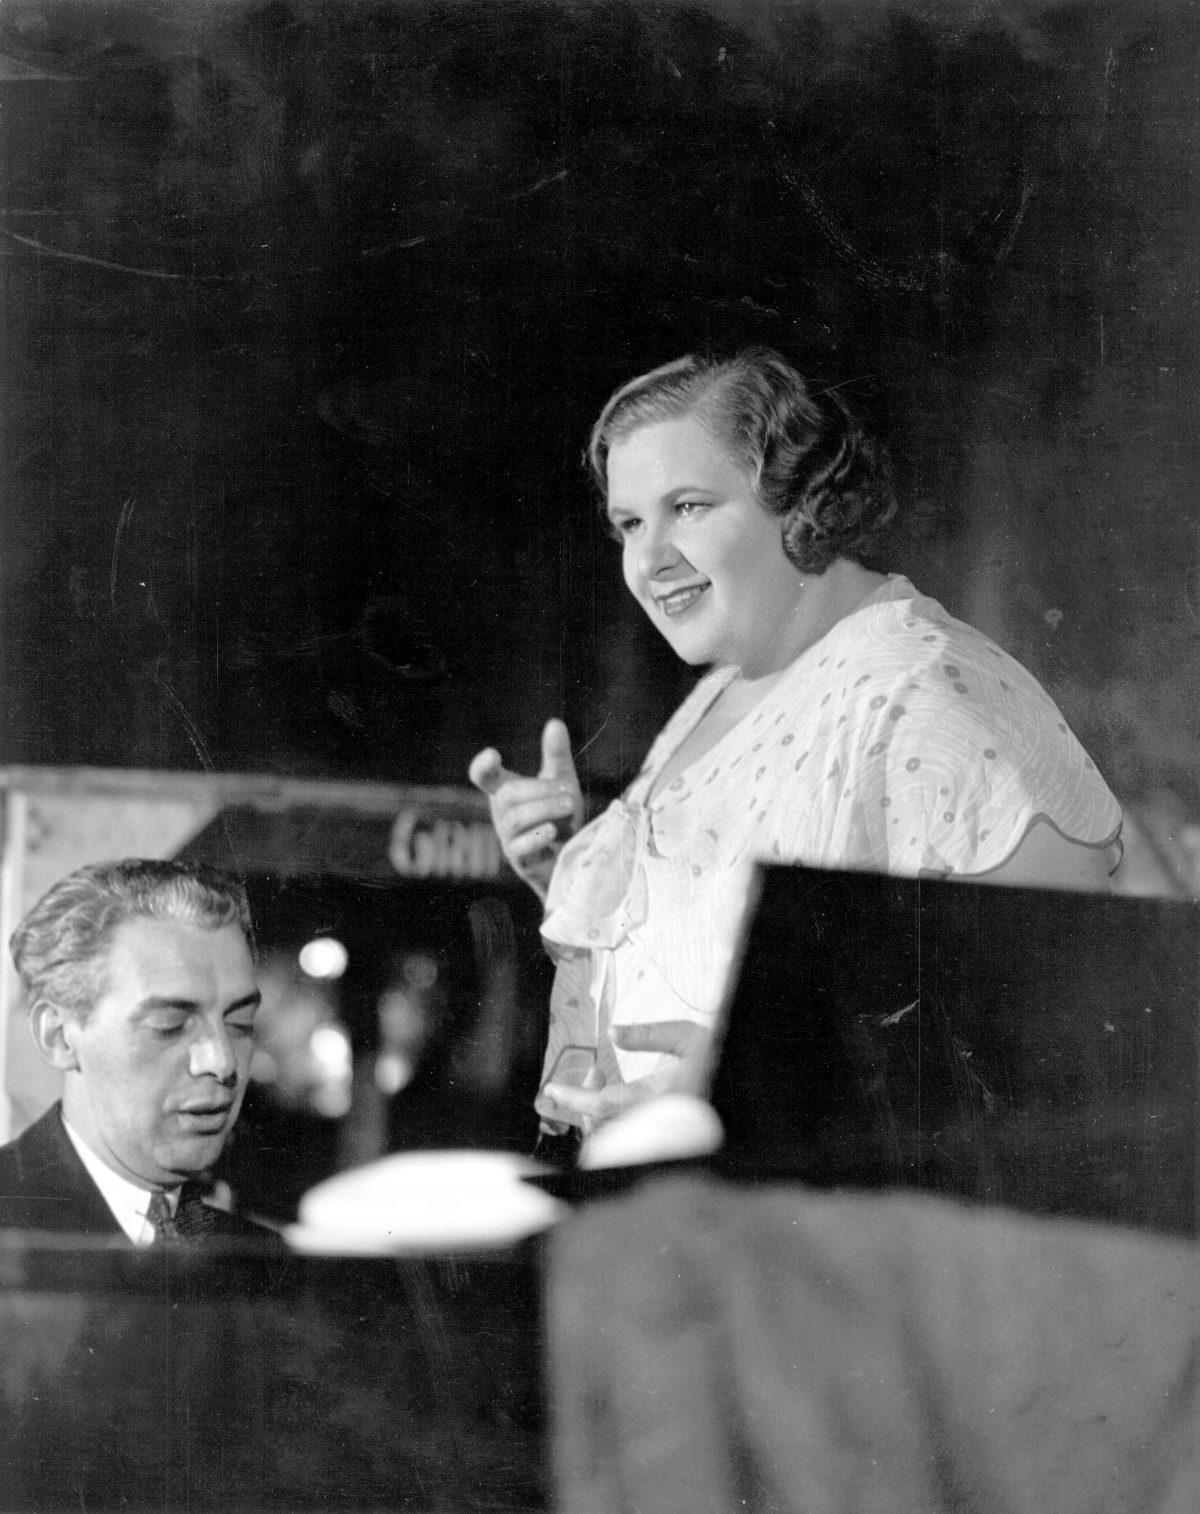 Kate Smith (1909-1986), the American singer who was a very popular radio performer in the 1930s and 1940s, with composer Arthur Johnston in a 1933 file photo. (Hulton Archive/Getty Images)